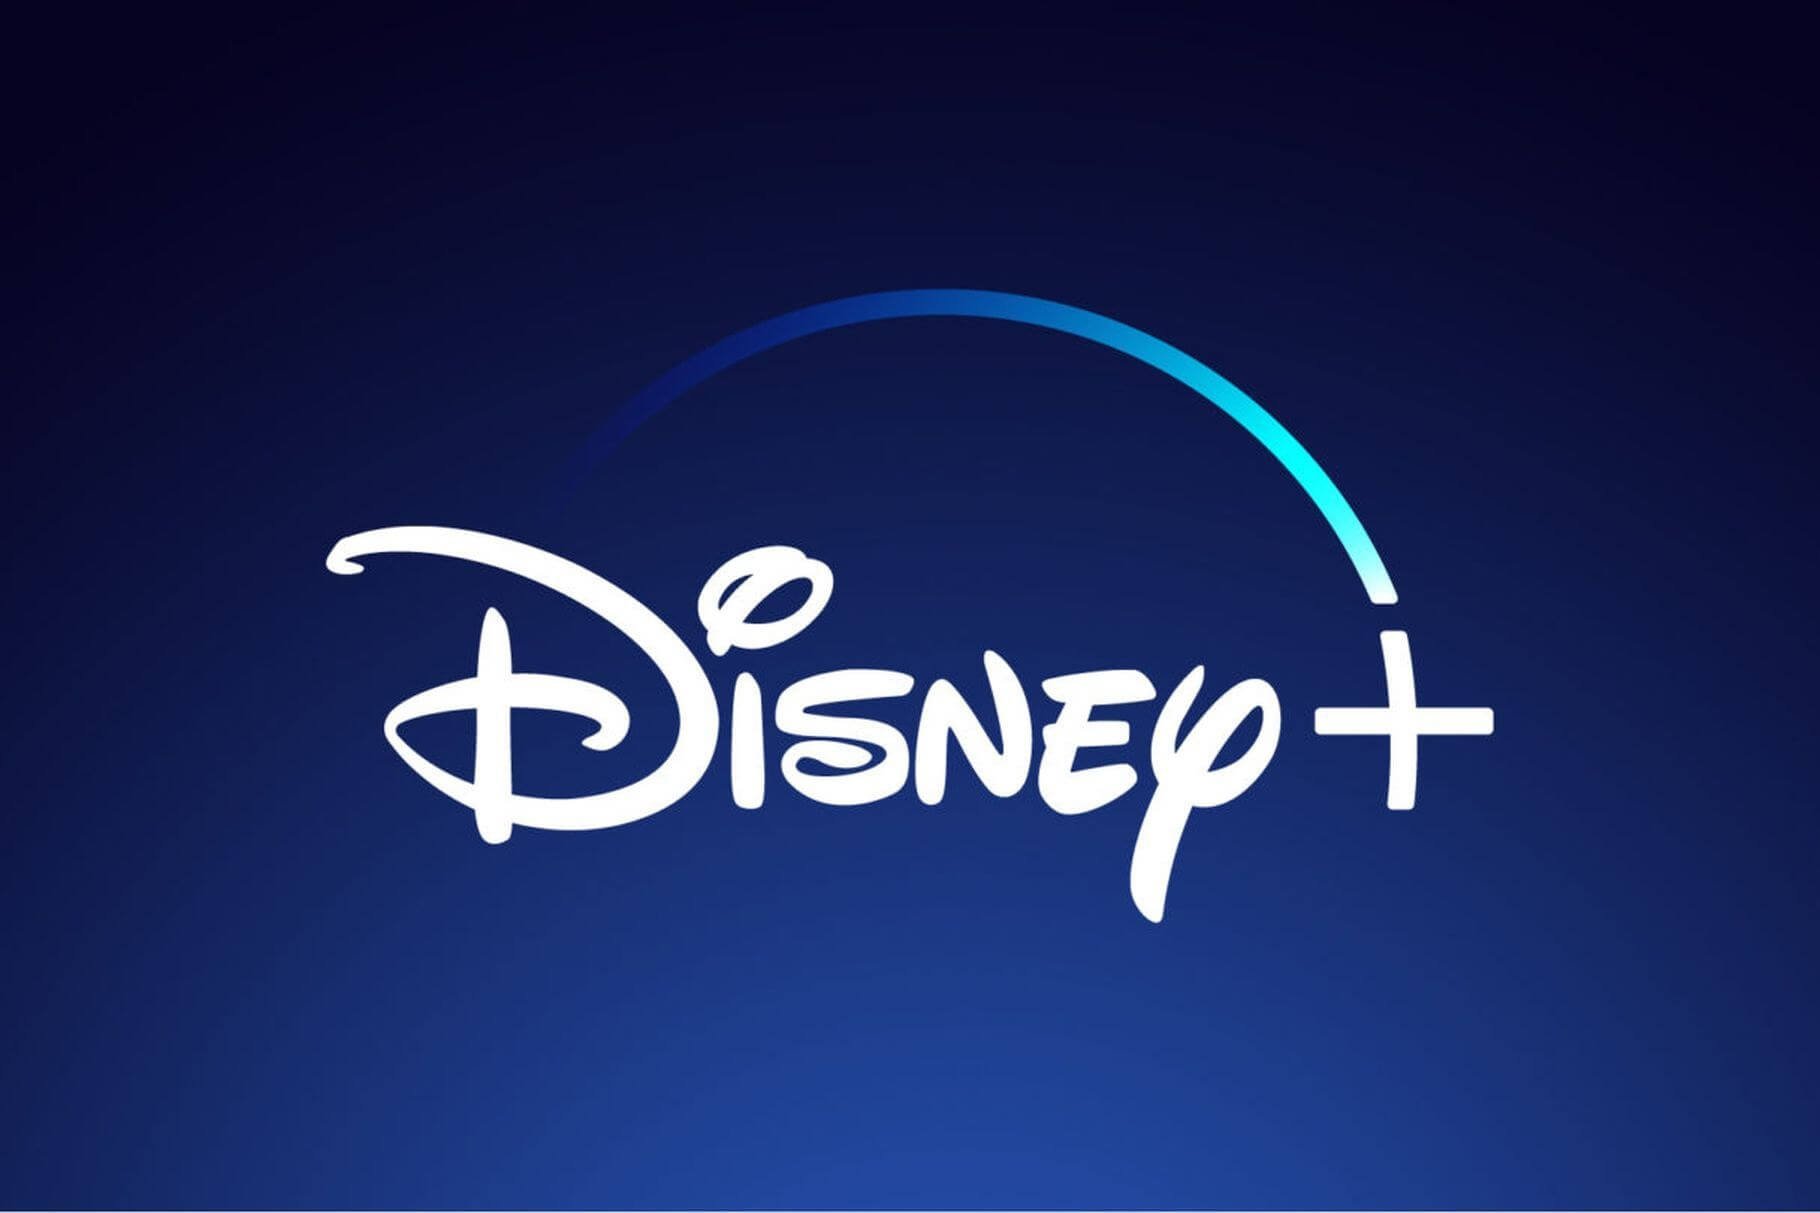 Disney says that despite Disney+ hacked accounts, there's no evidence of a security breach